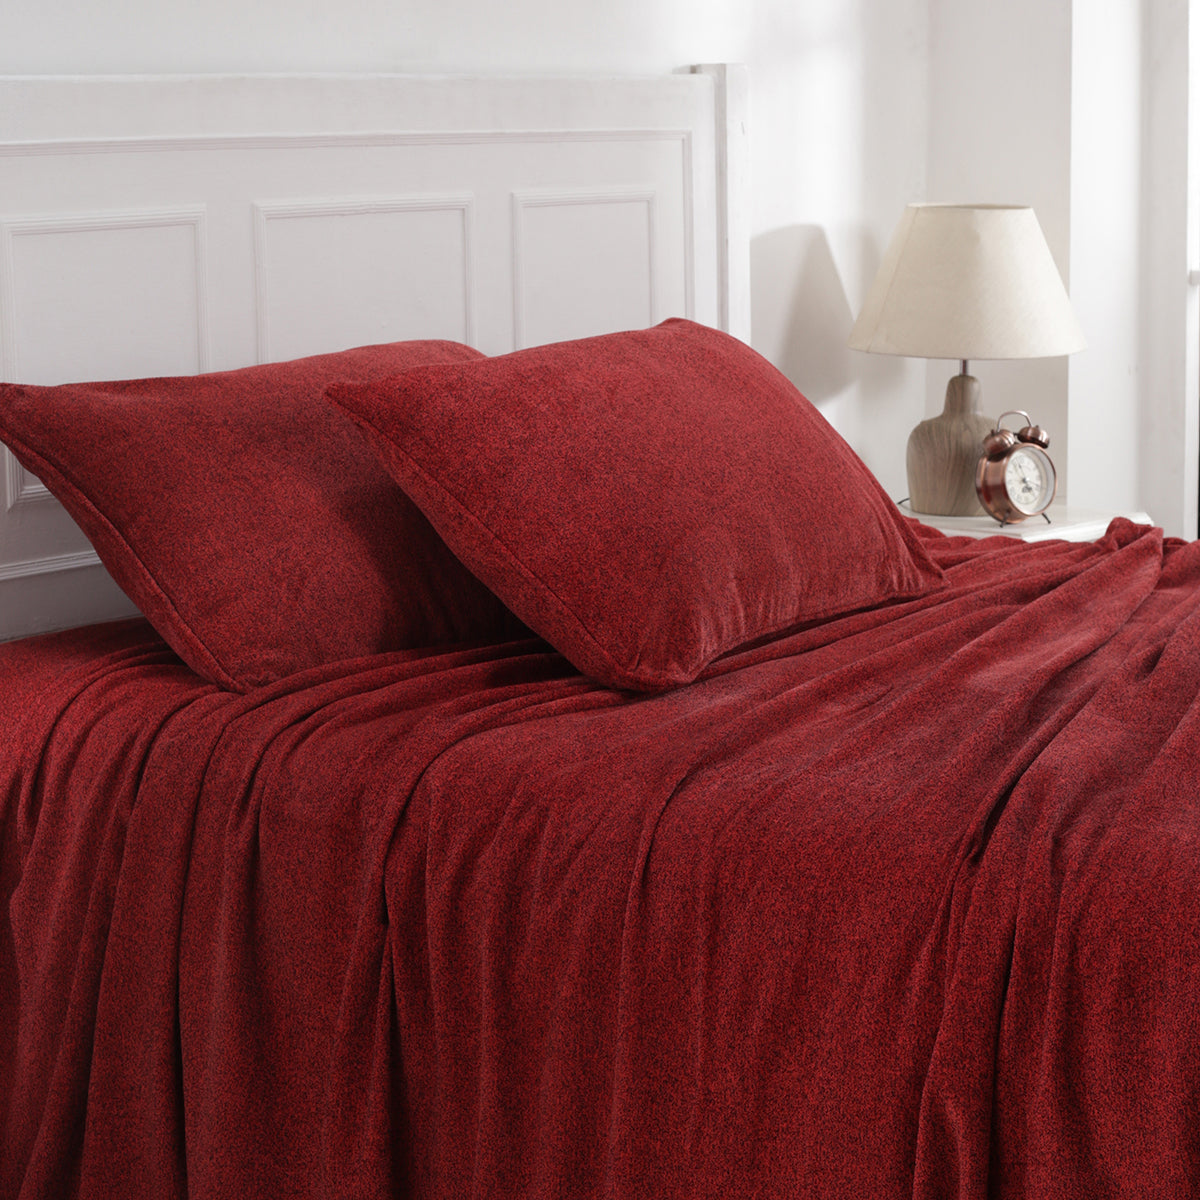 Charlotte 100% Cotton Solid Woven Red/Black Bed Cover/Blanket